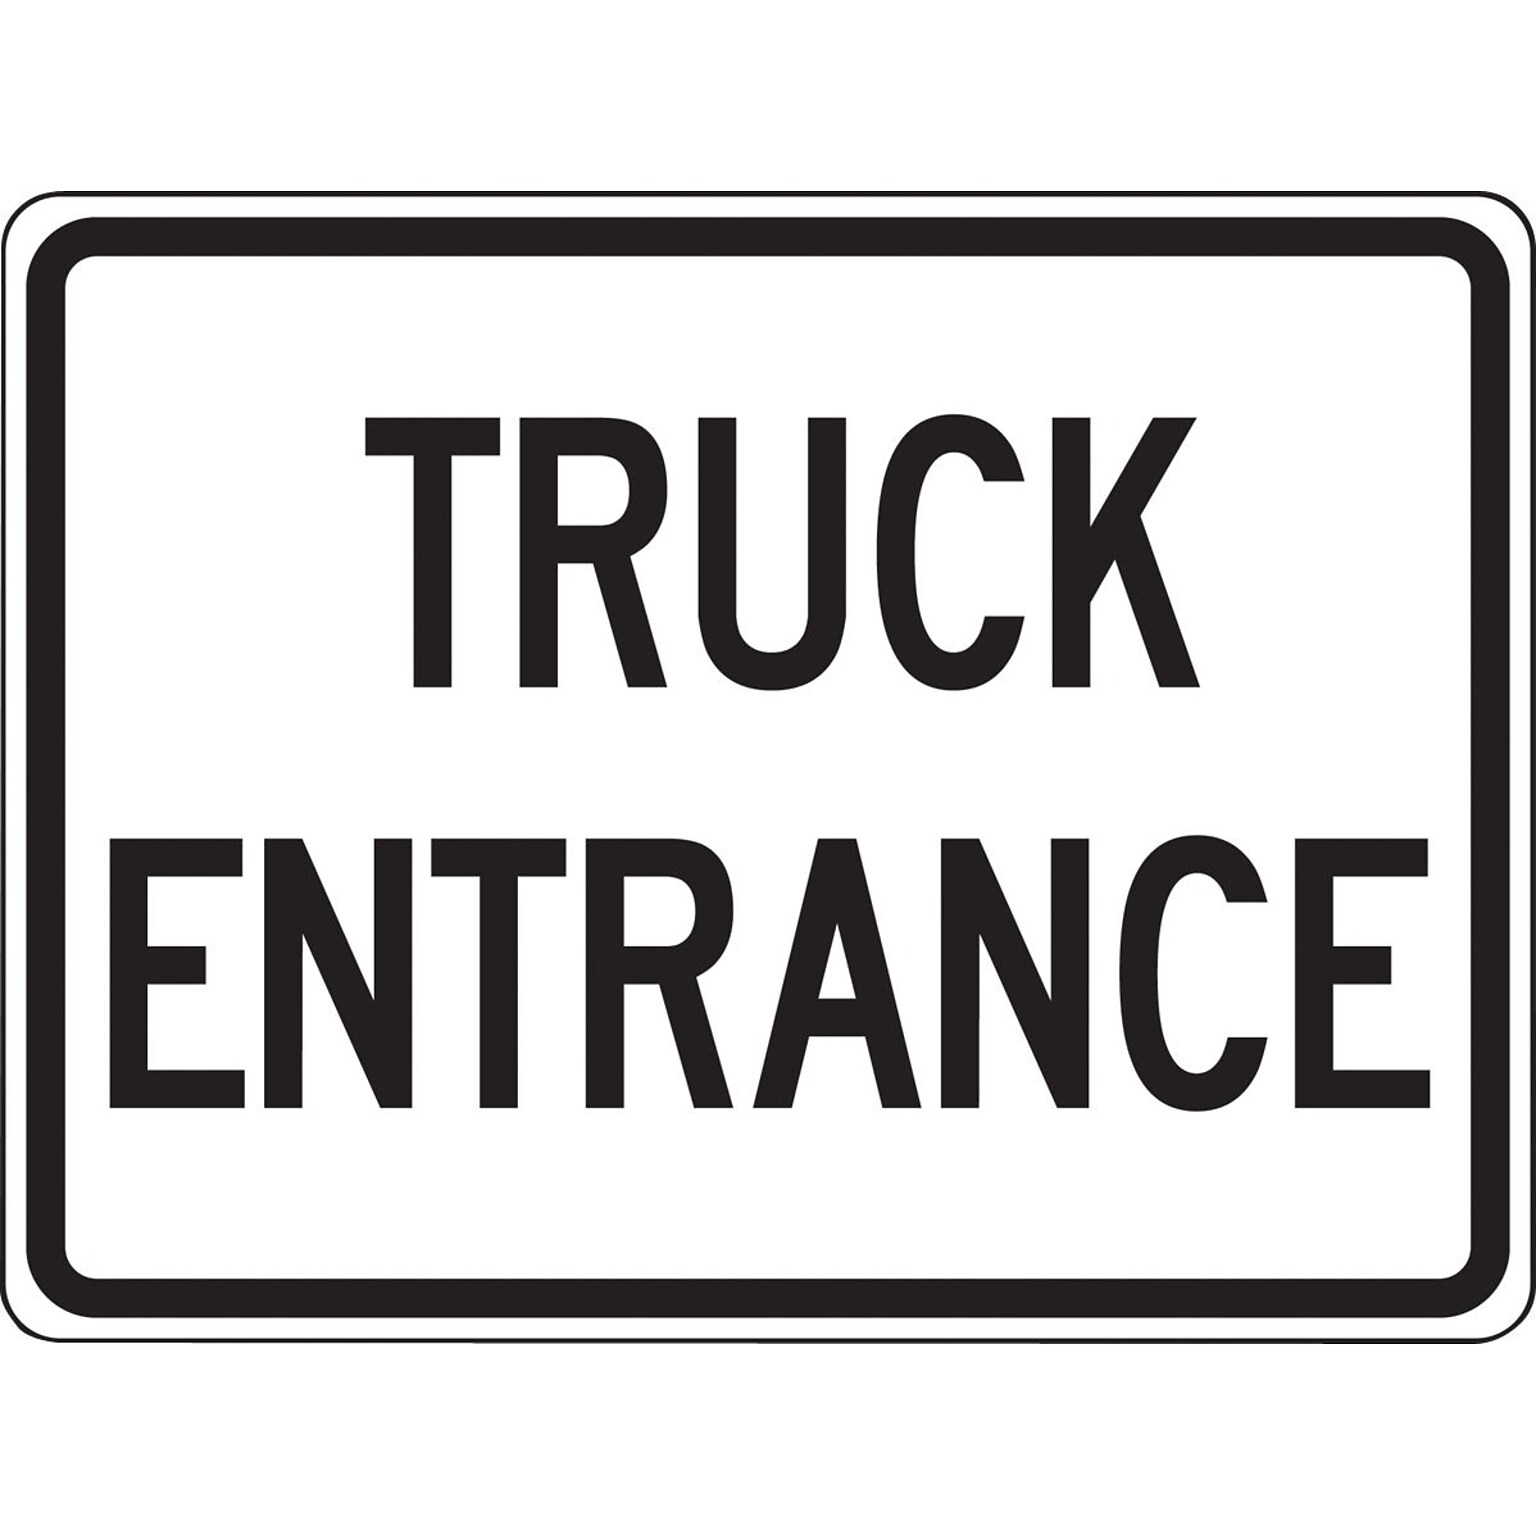 Accuform 18 x 24 Reflective Aluminum Facility Traffic Sign TRUCK ENTRANCE, Black On White (FRR045RA)